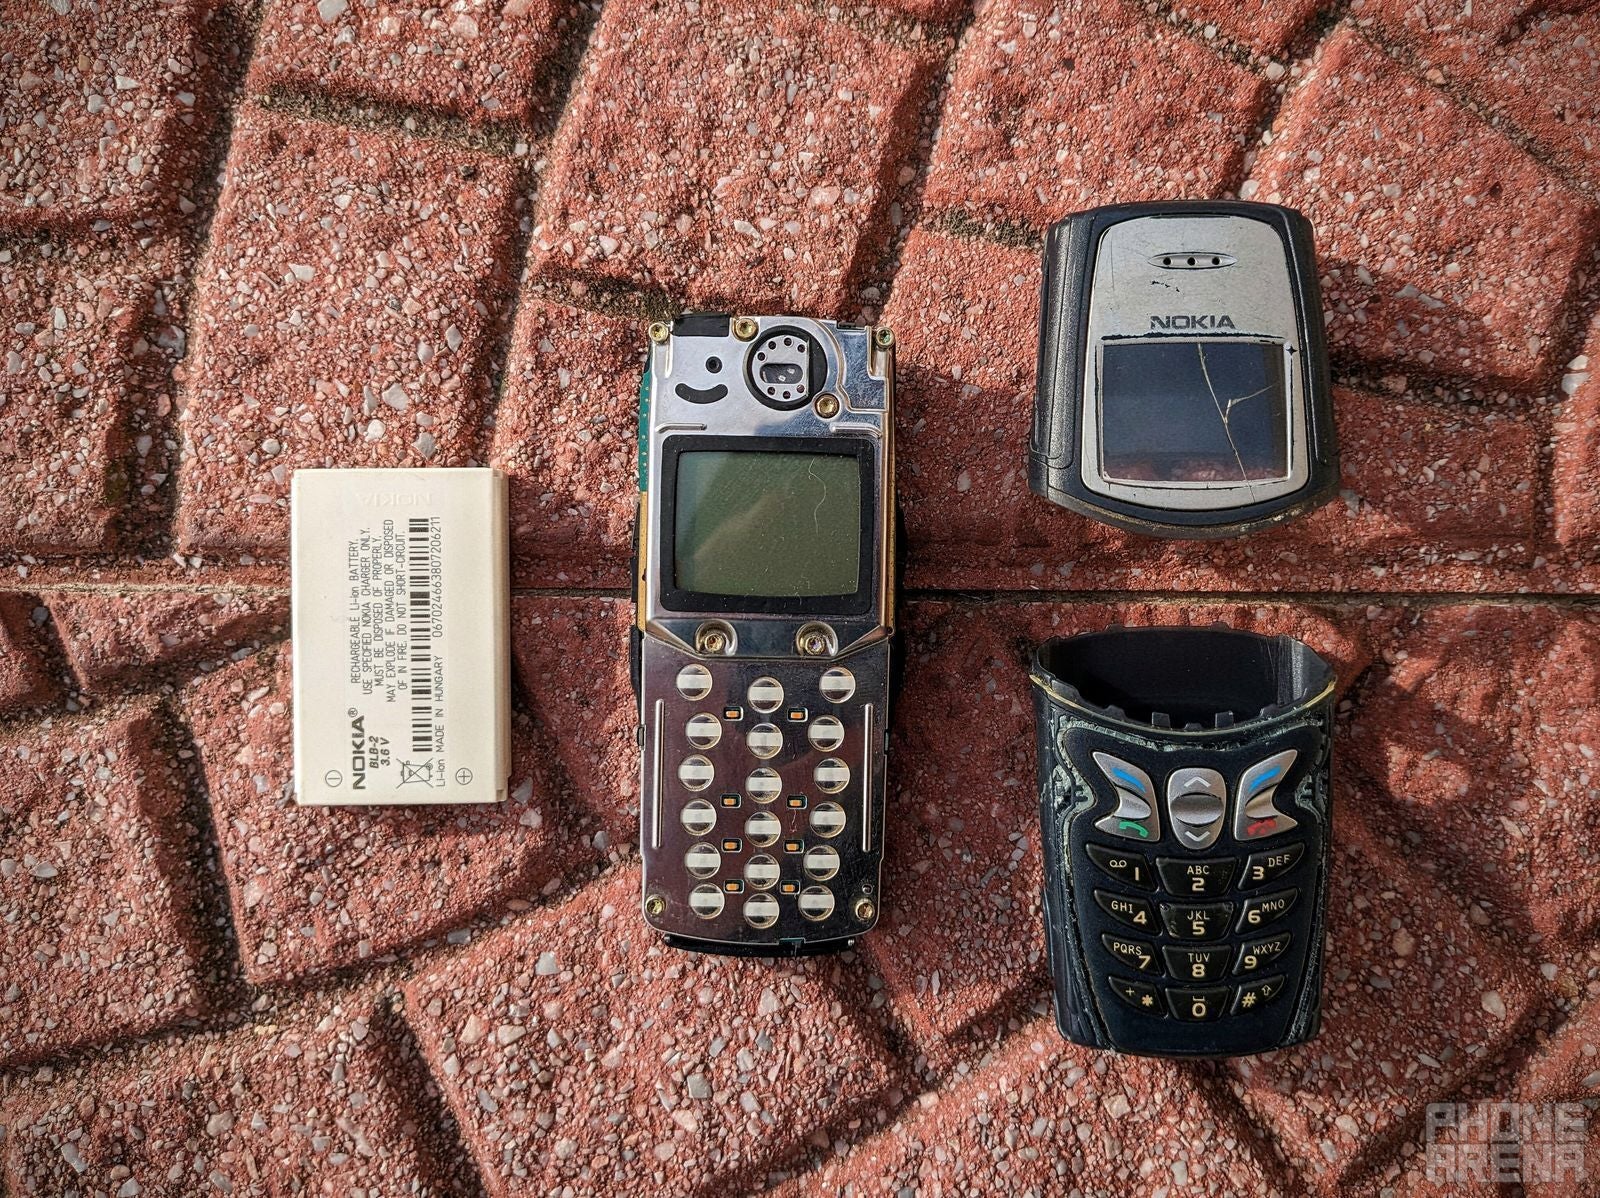 The 5210 looked really futuristic with its shell off. - Nokia 3310 might have been indestructible, but my 5210 beat it by a long shot